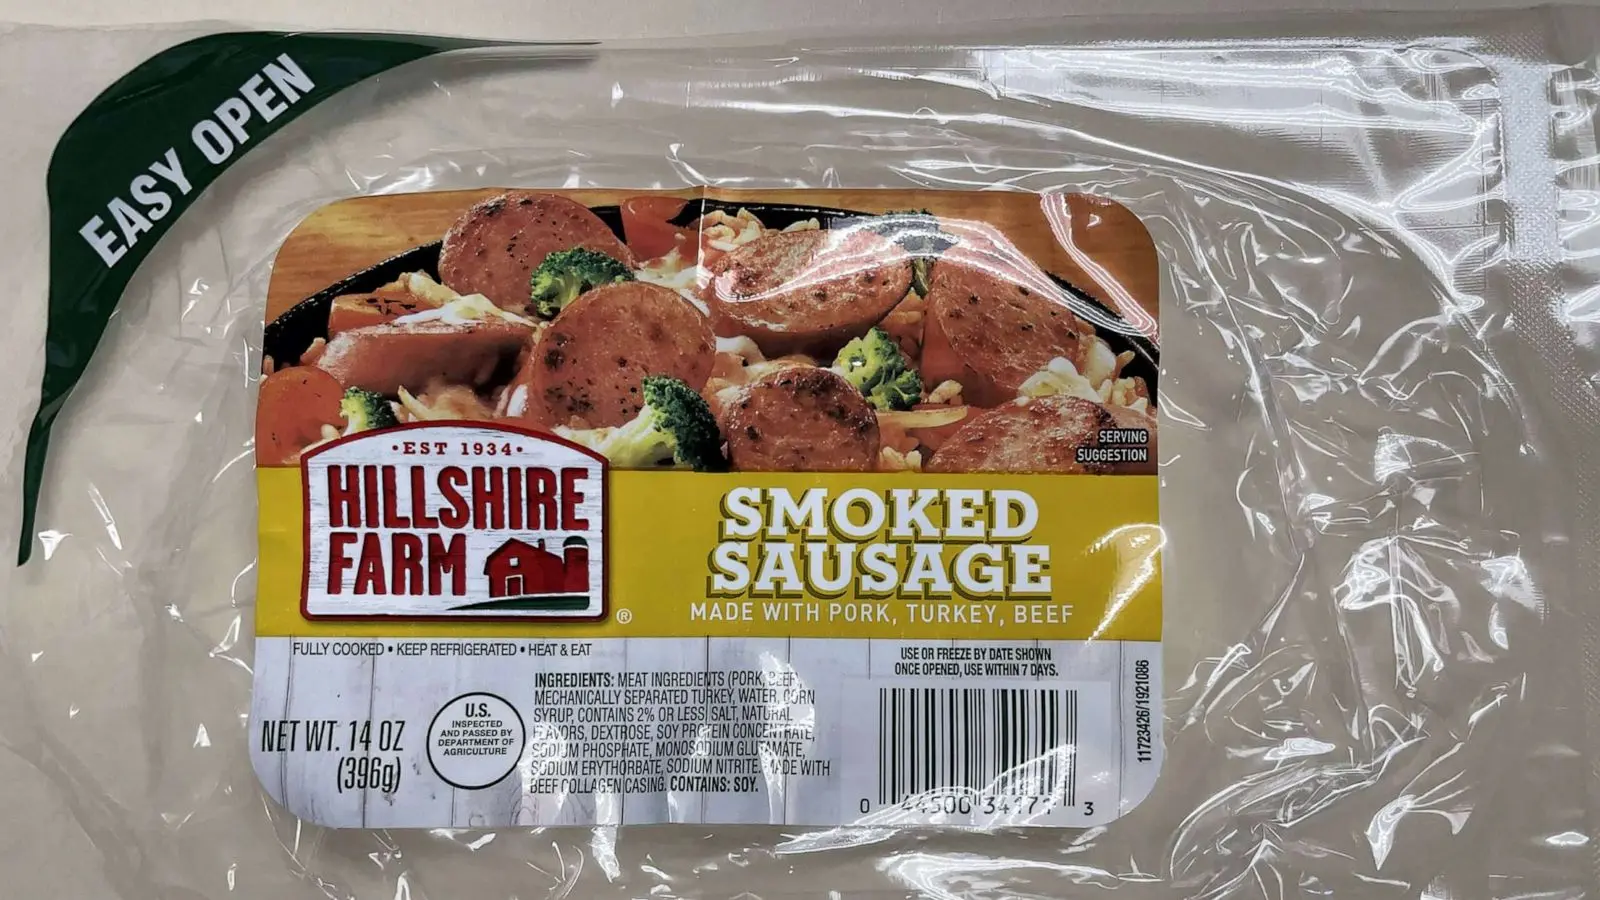 smoked sausage use by date - How long is sausage good for after use by date